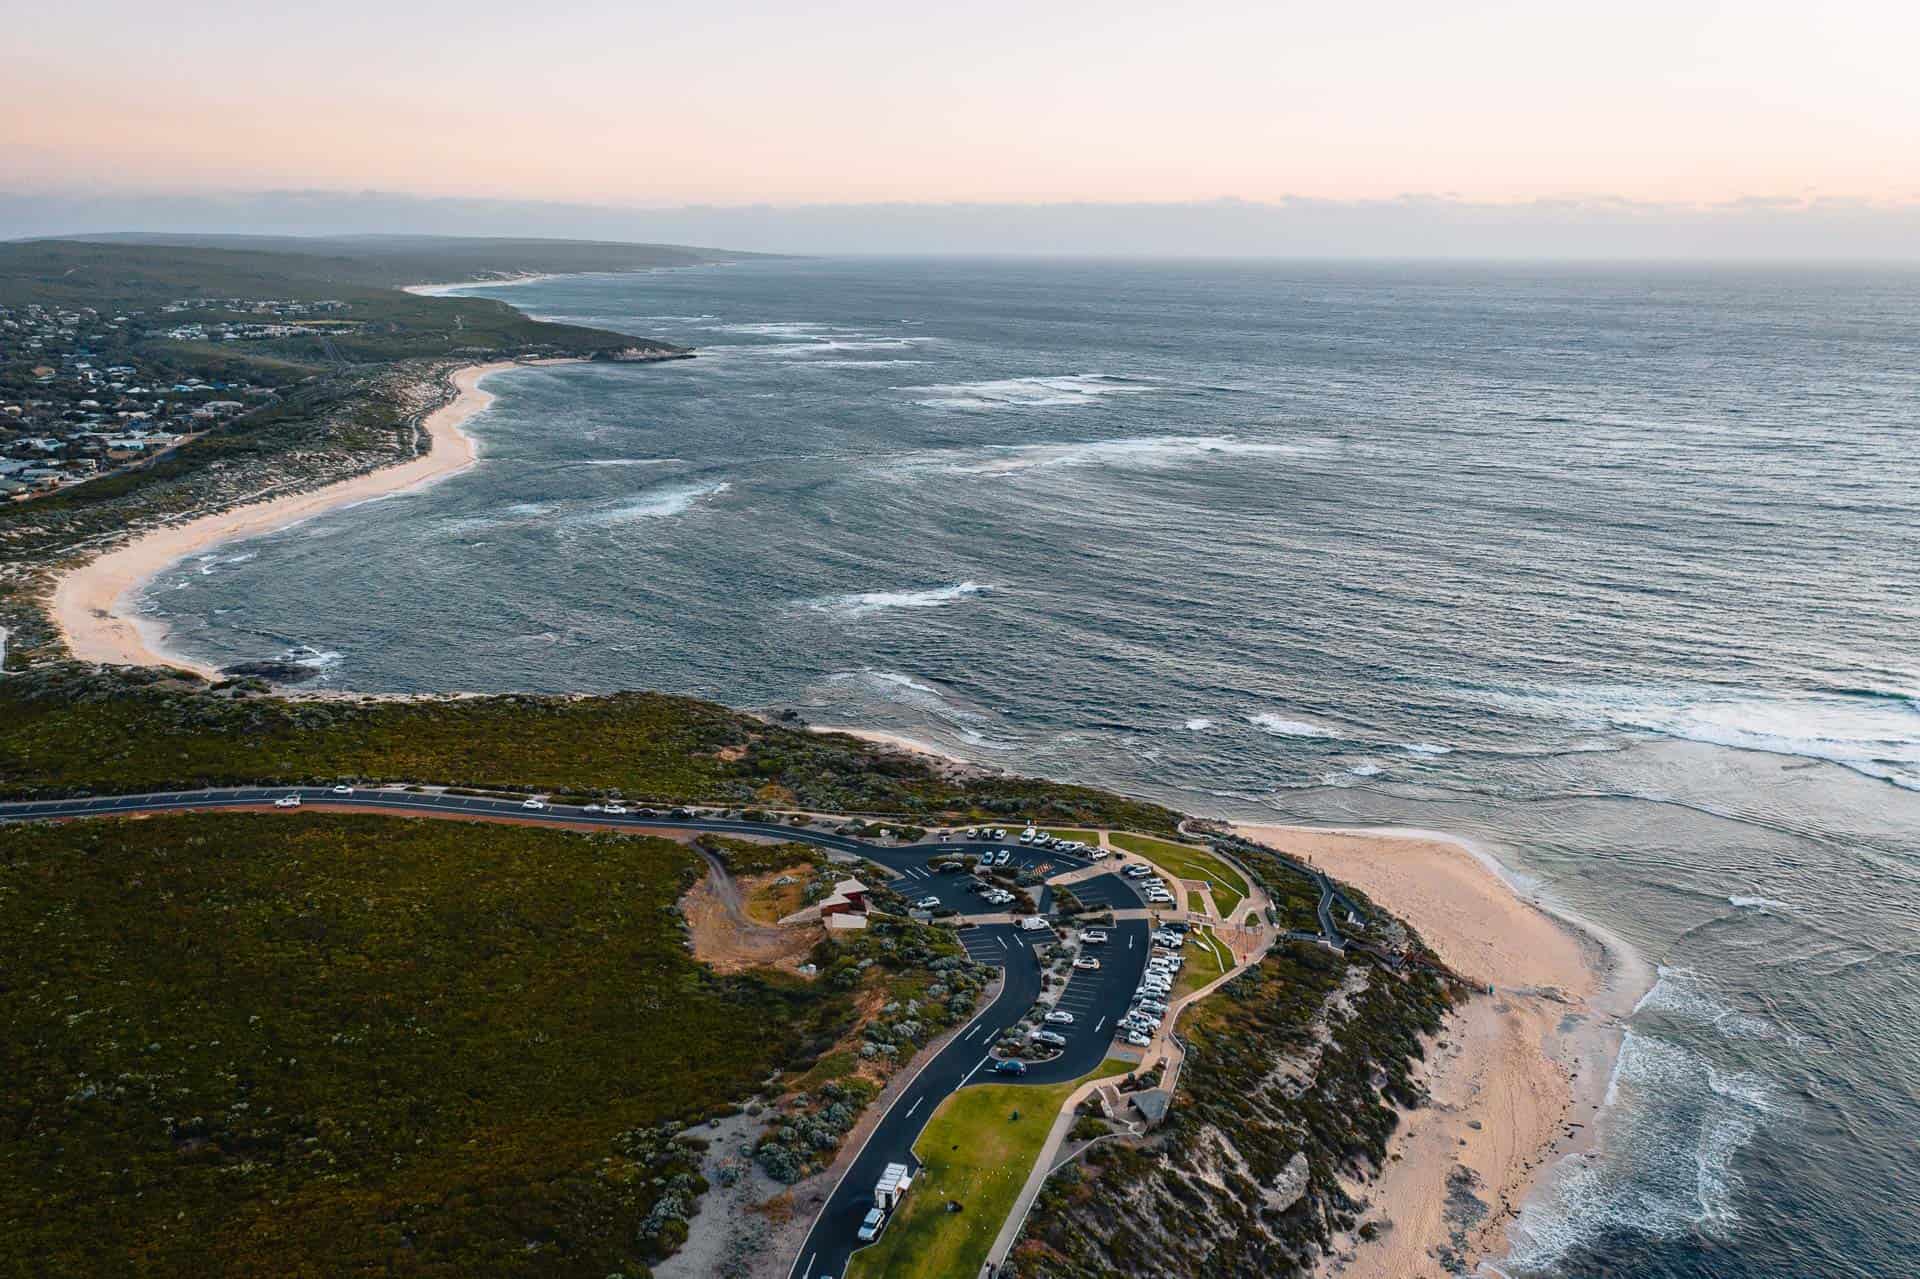 things to do in margaret river, what to do in margaret river, best things to do in margaret river, things to do margaret river, surfers point, surfers point margaret river